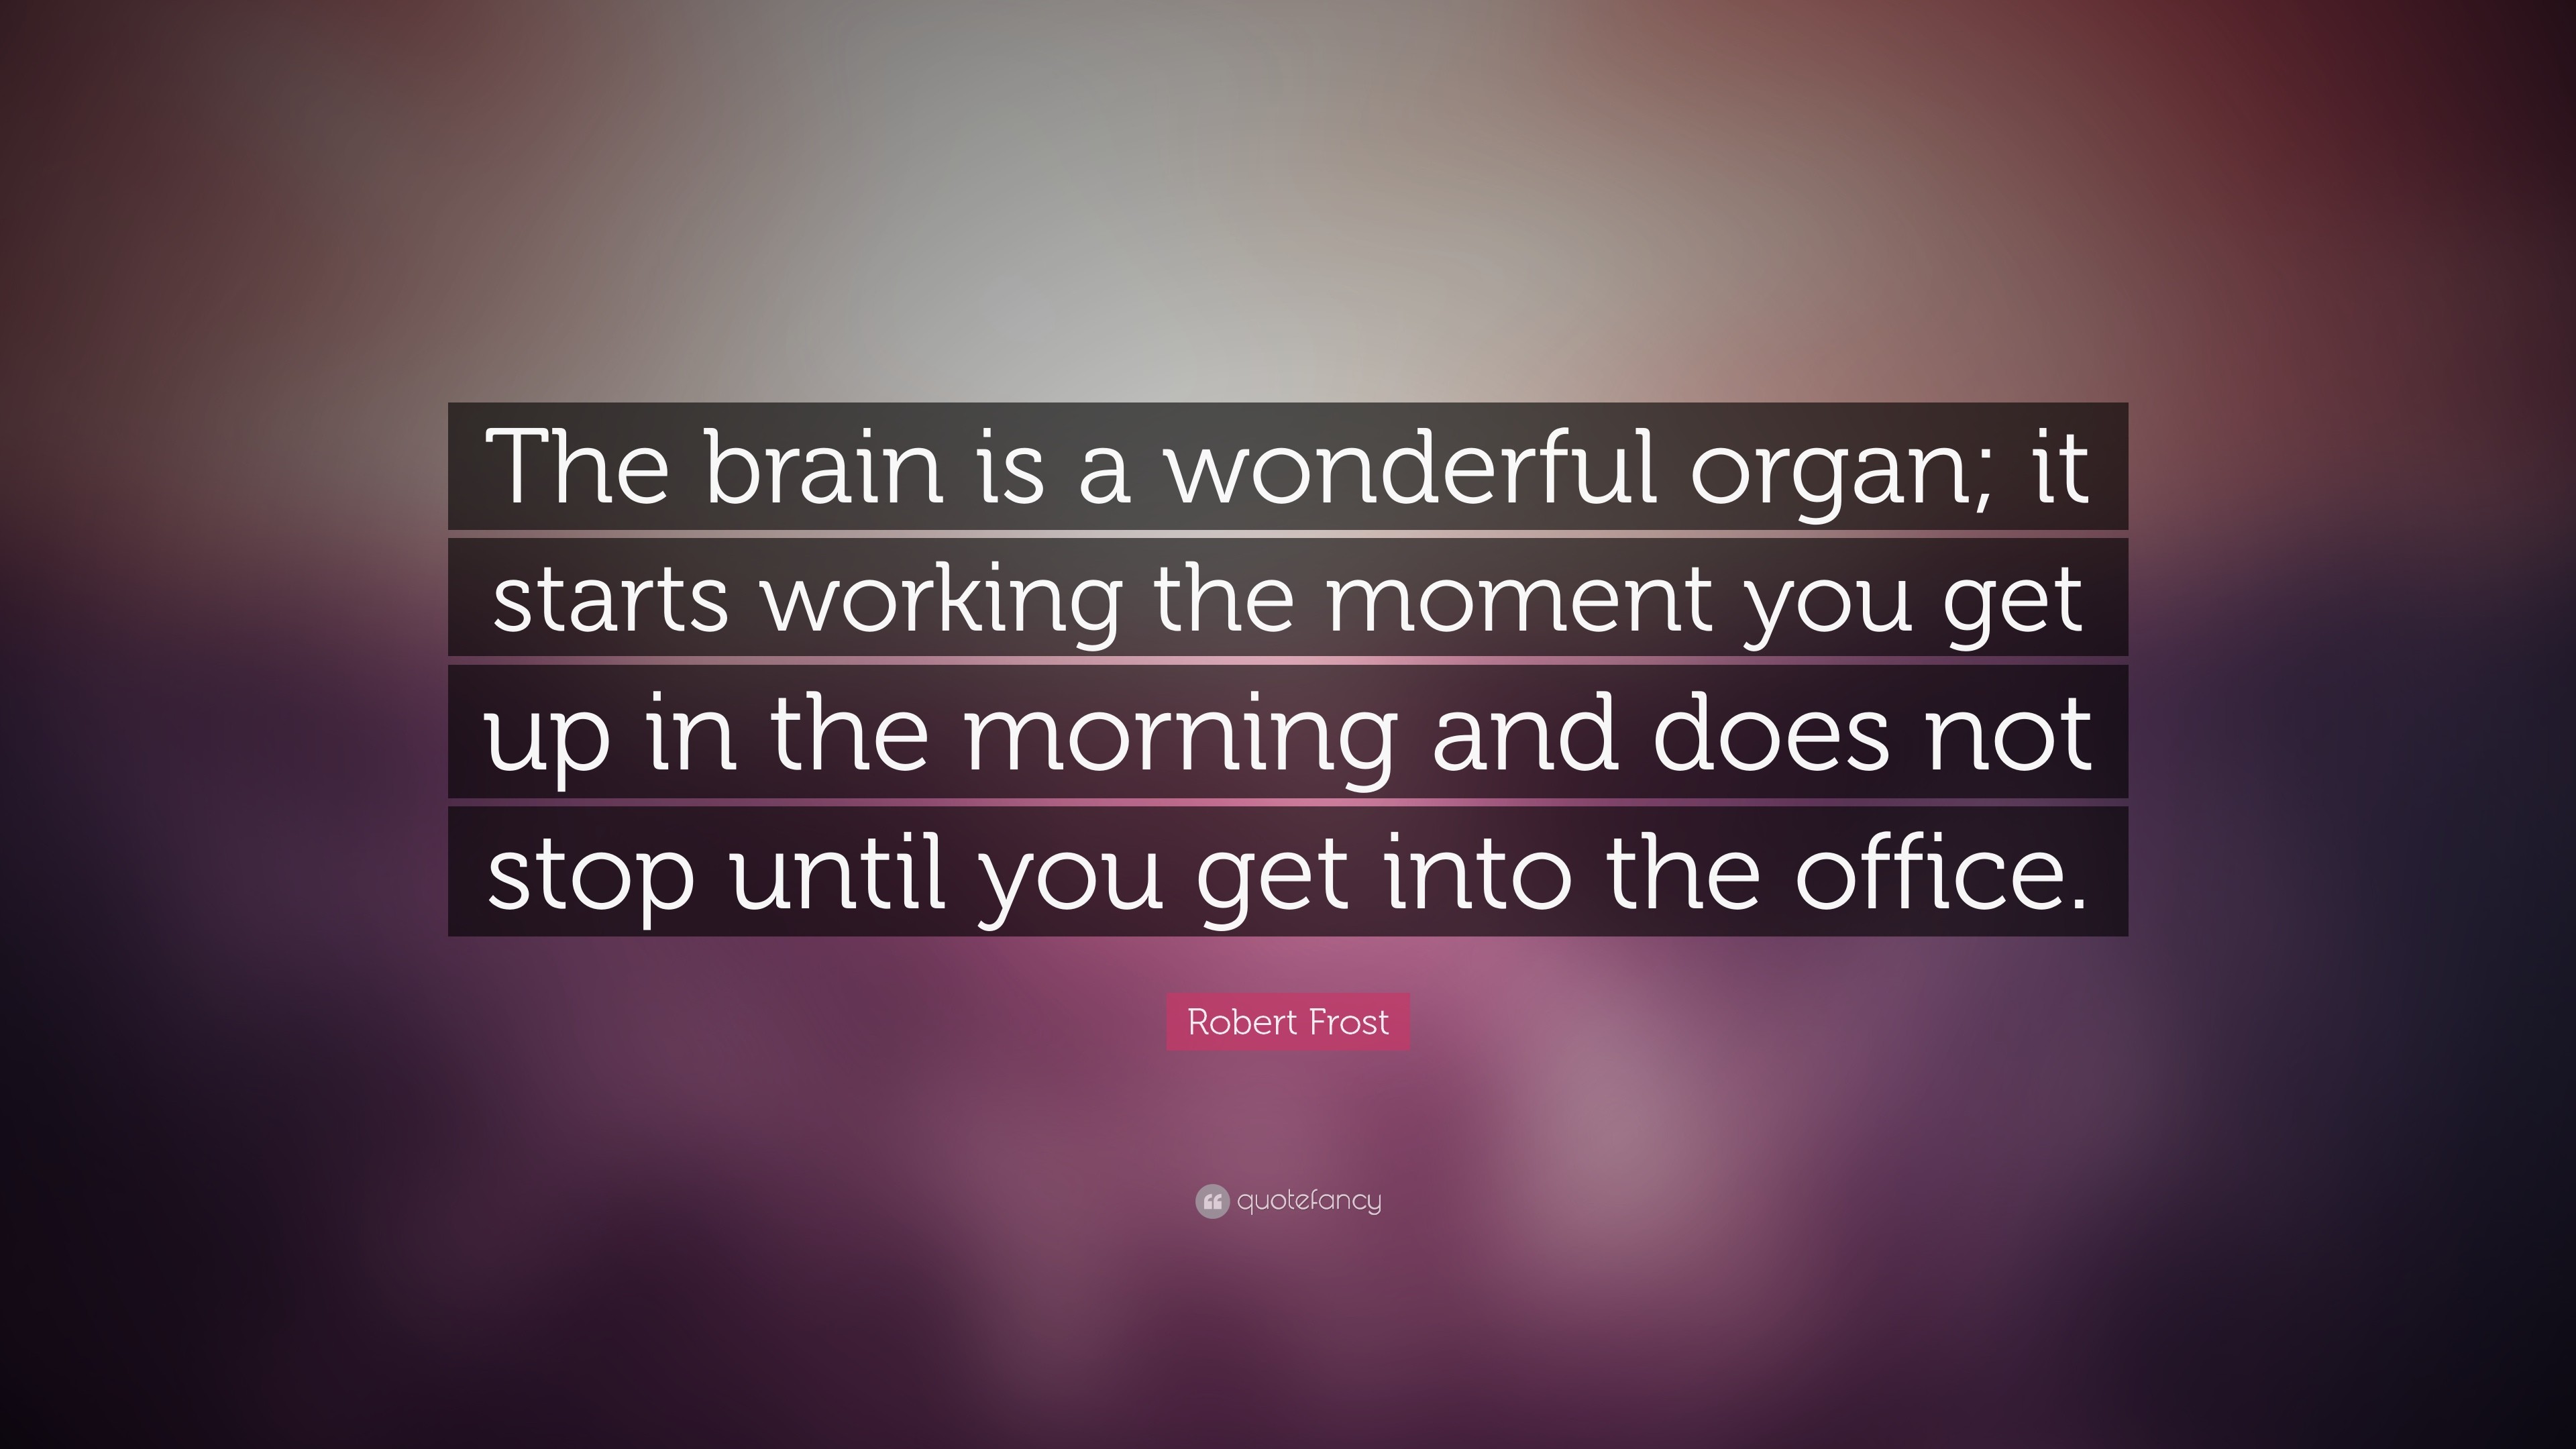 3840x2160 Robert Frost Quote: “The brain is a wonderful organ; it starts working the